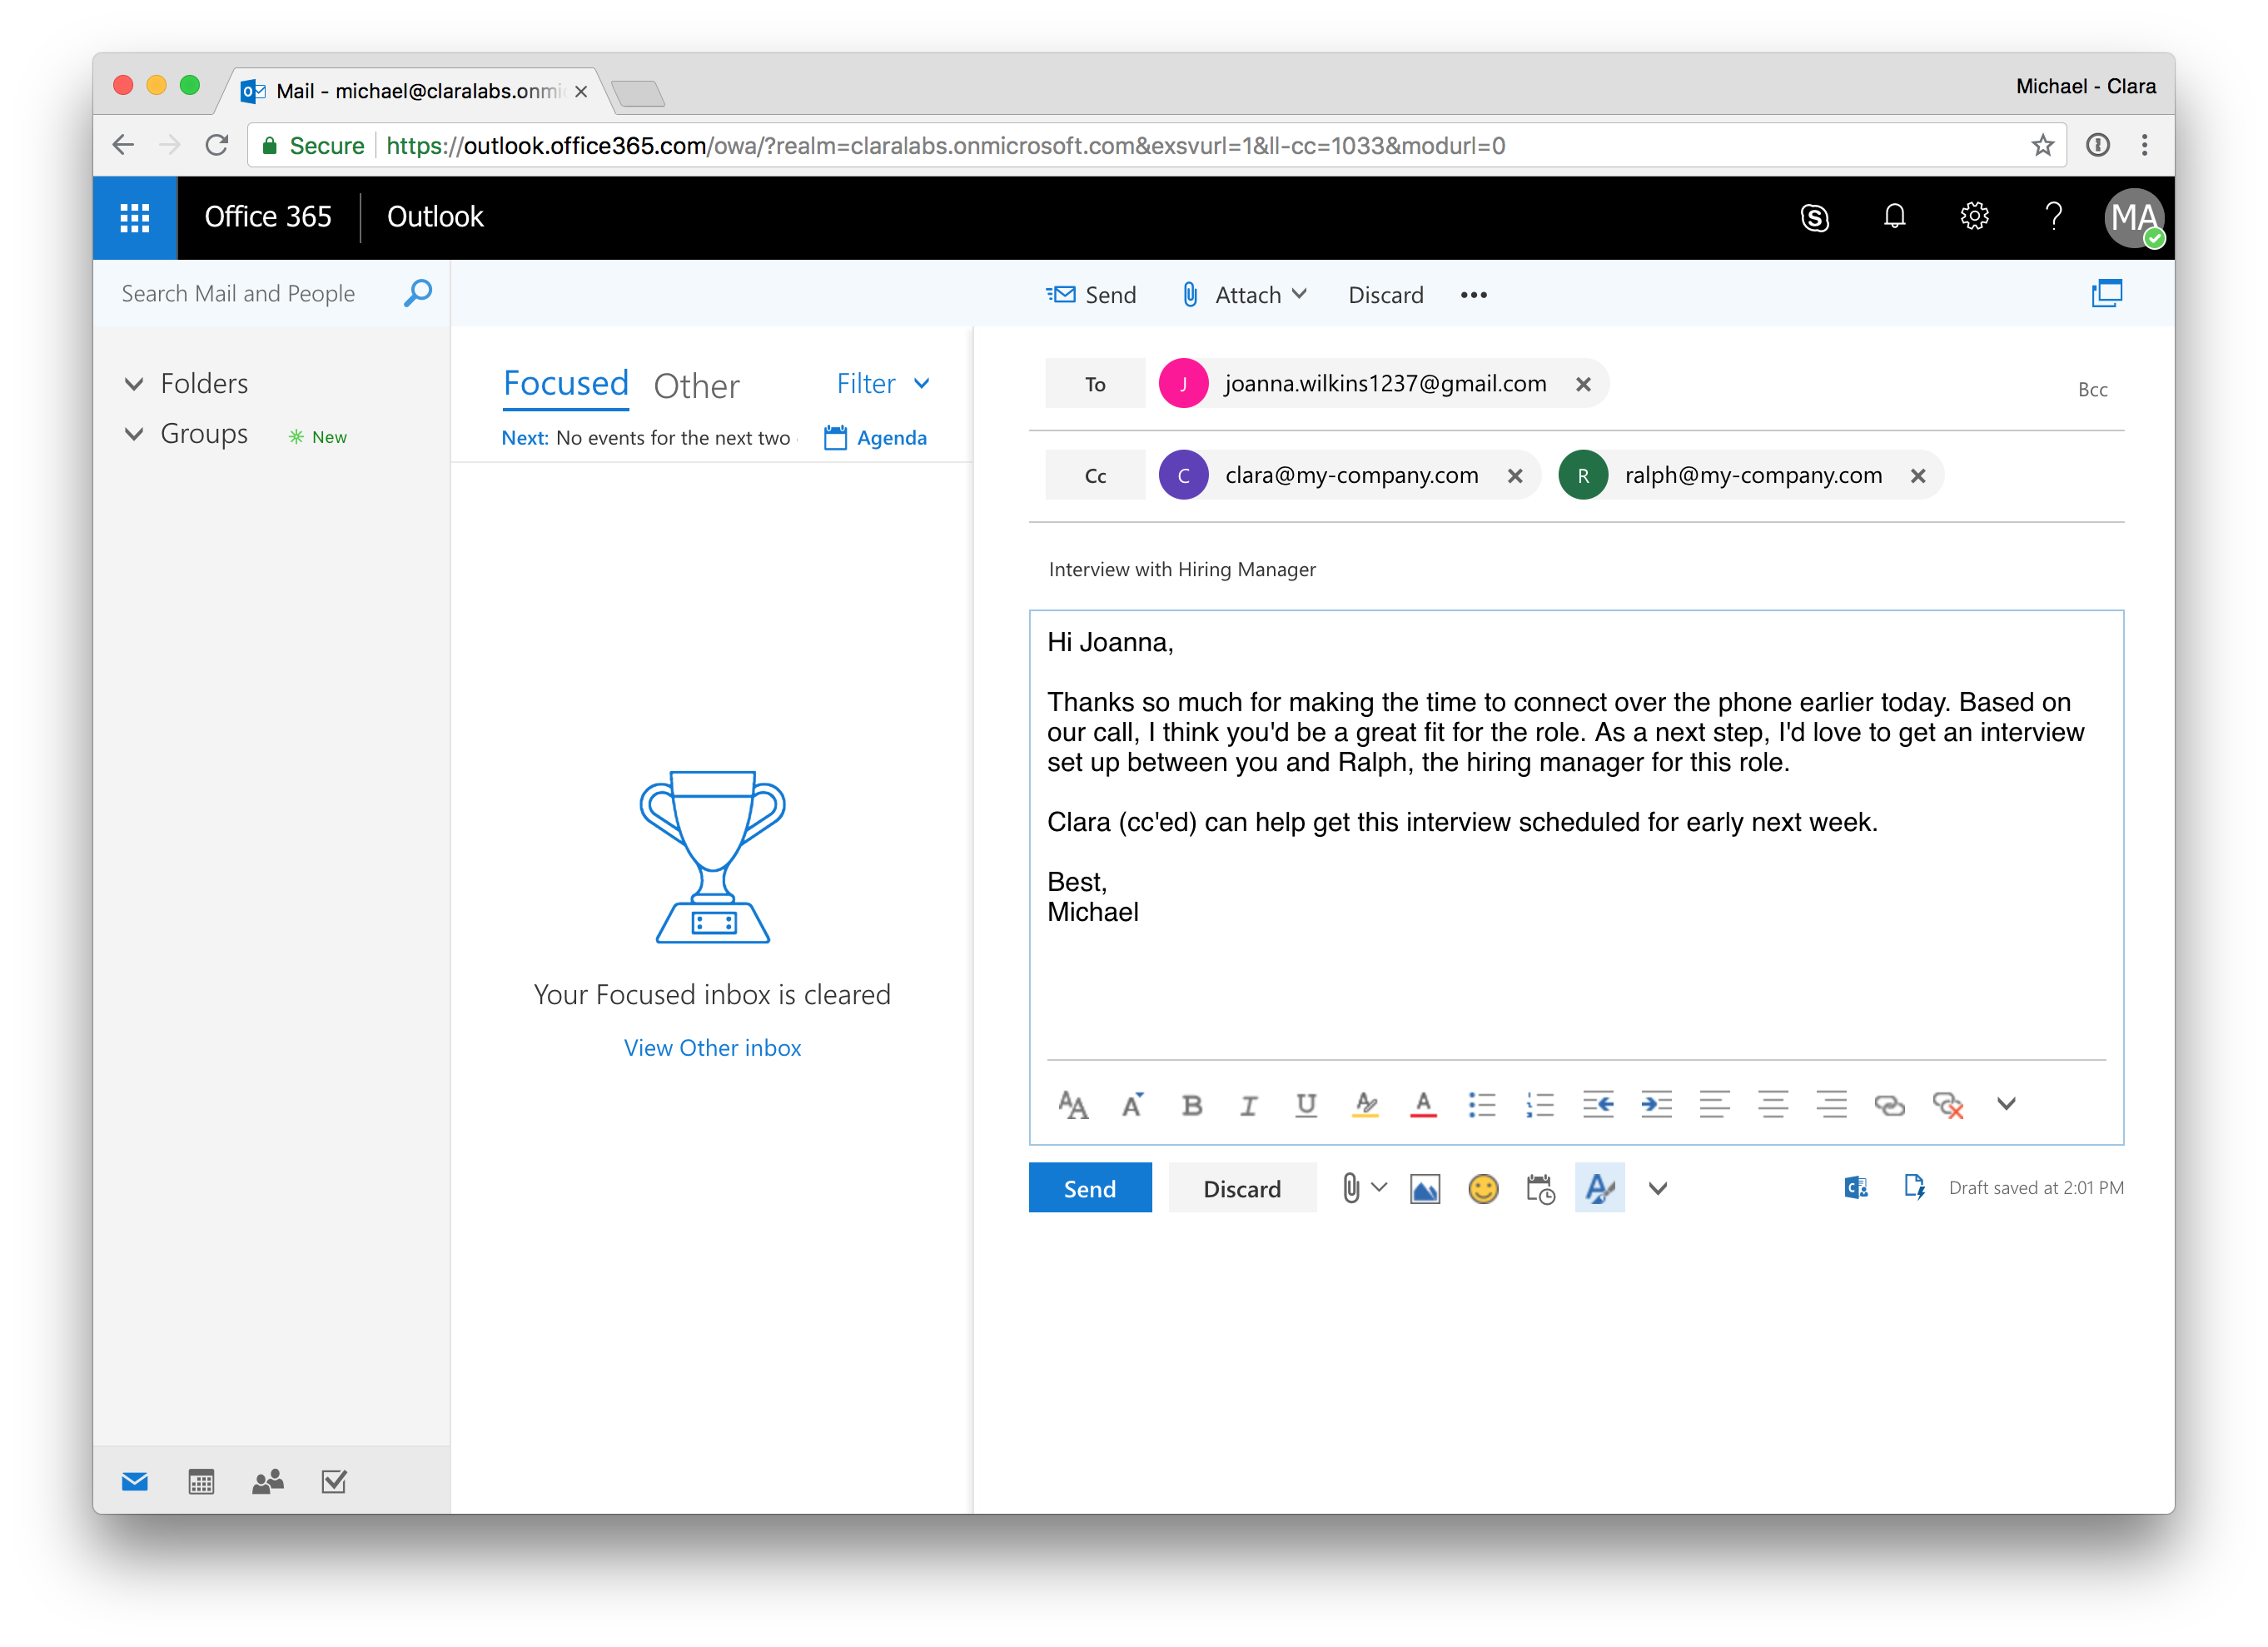 Clara works from the Office 365 inbox